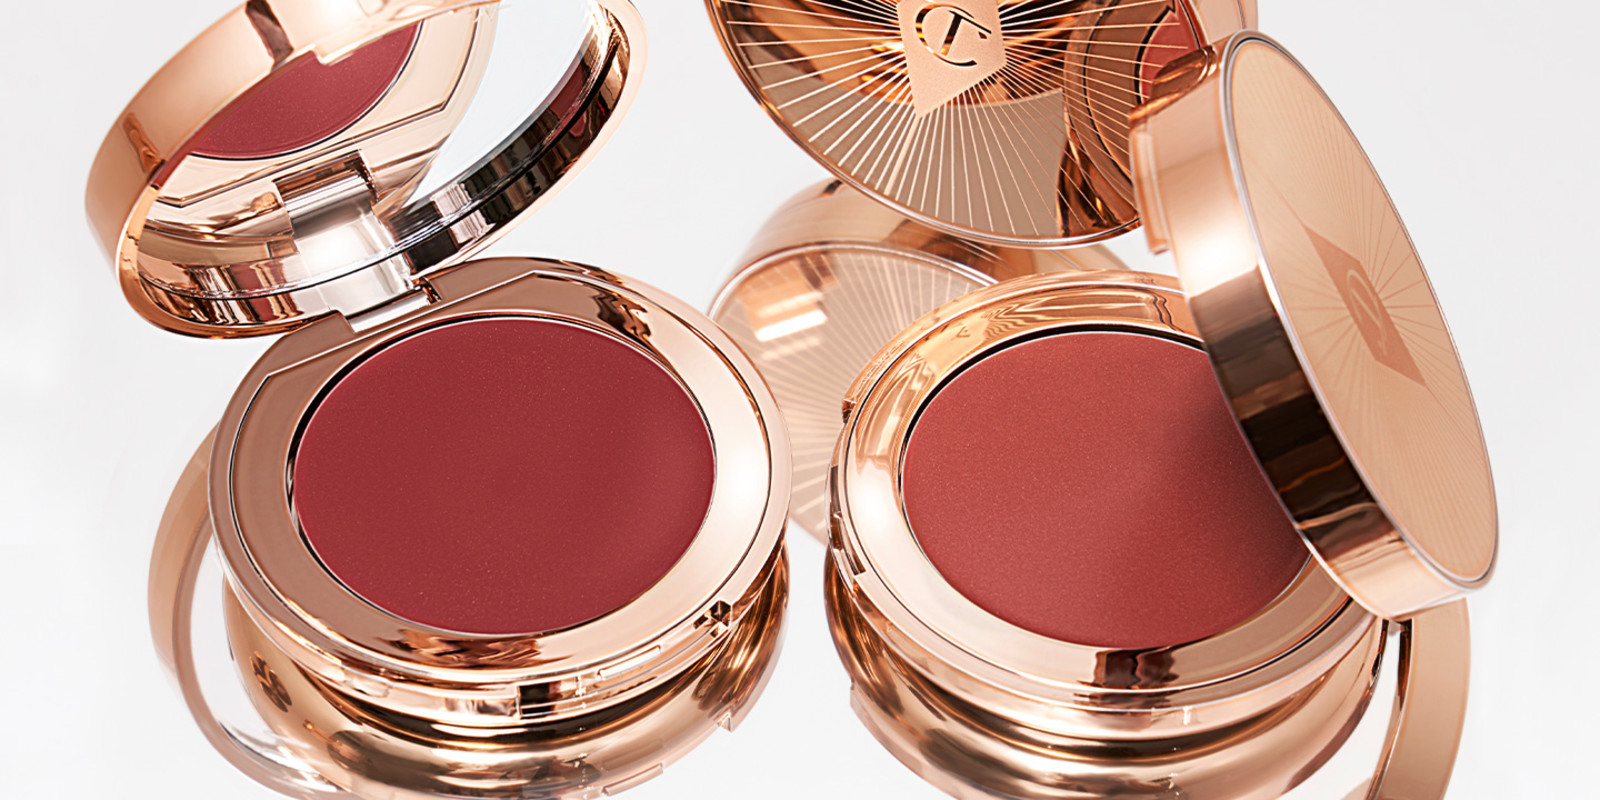 A collection of lip and cheek cream compacts in gold packaging in shades of berry-pink and rosebud pink. 